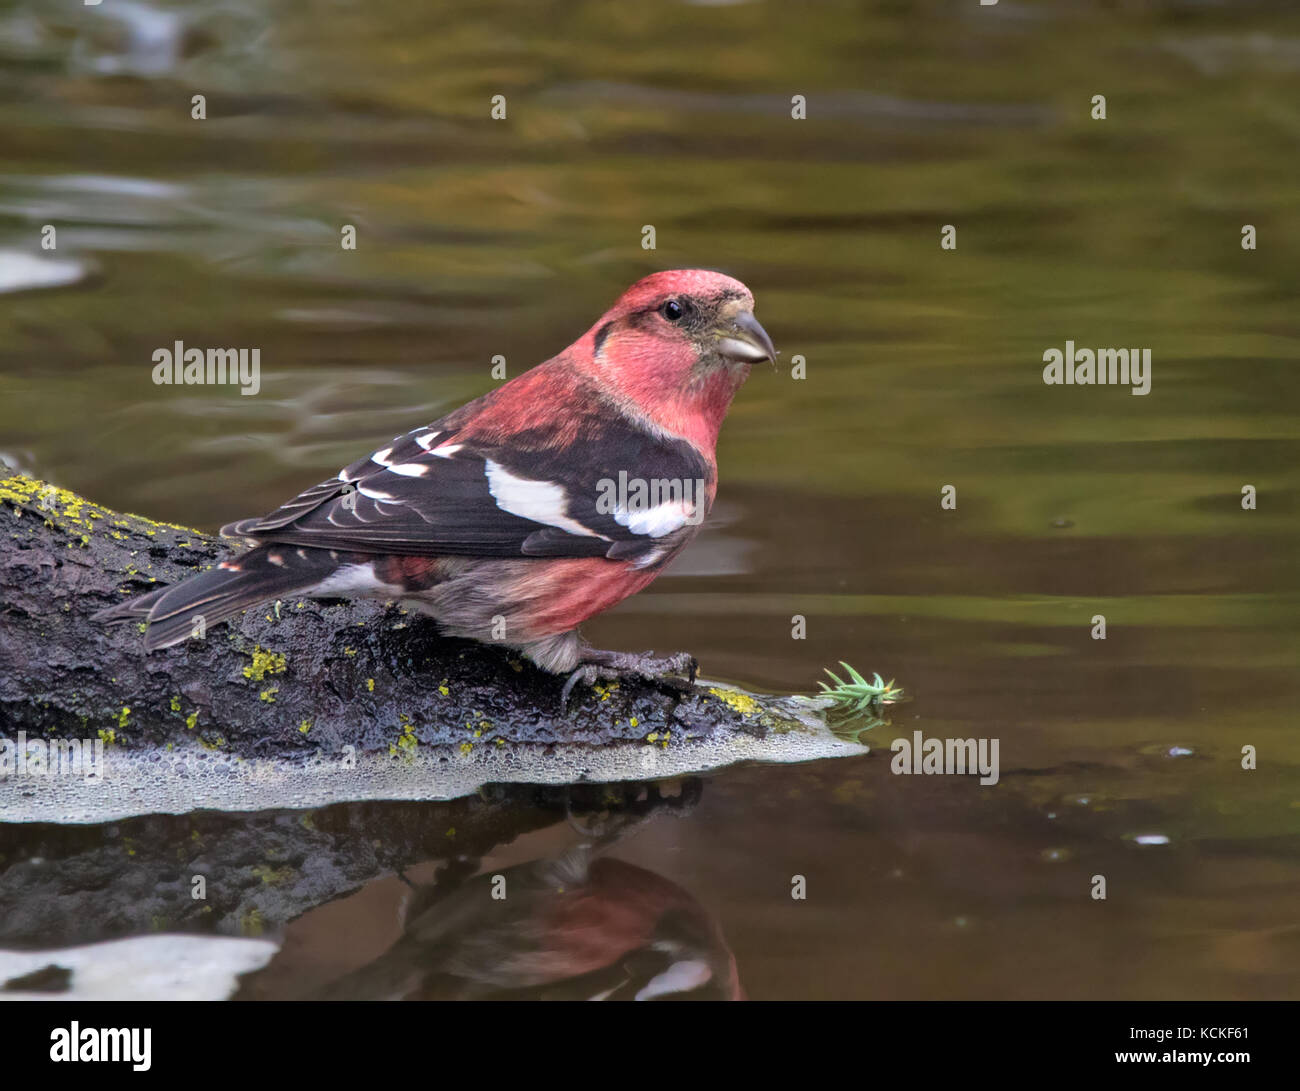 A male White-winged Crossbill, Loxia leucoptera, perched by a backyard pond in Saskatoon, Saskatchewan Stock Photo